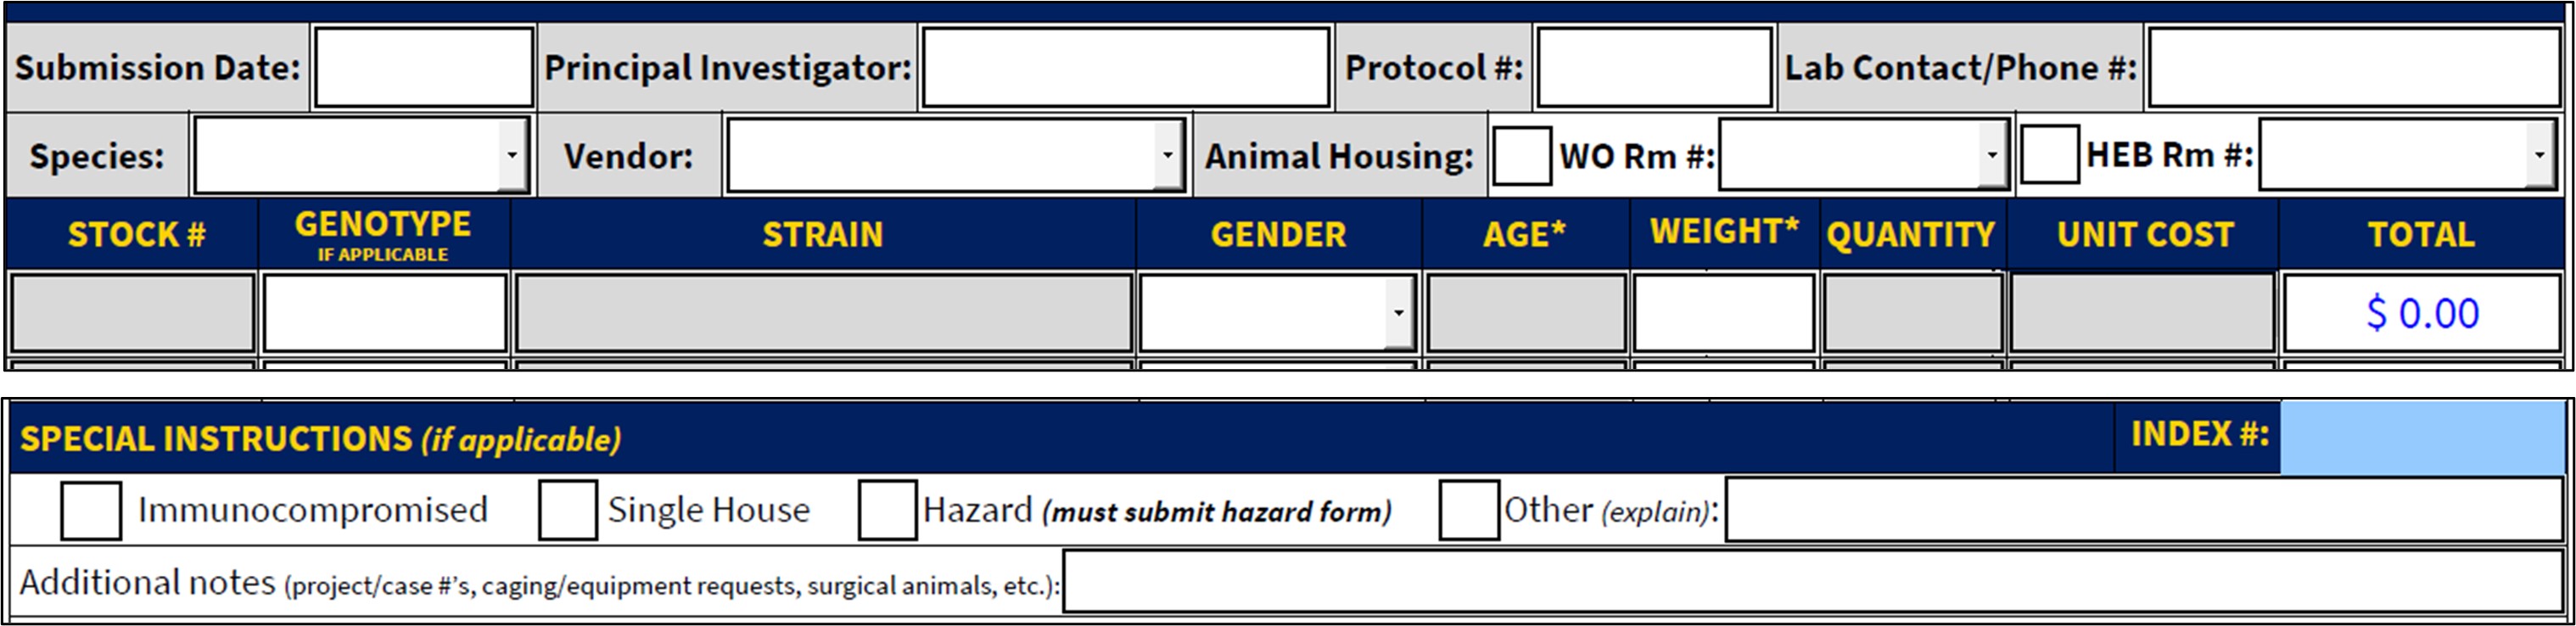 Image of the required fields on the Animal Requisition Form